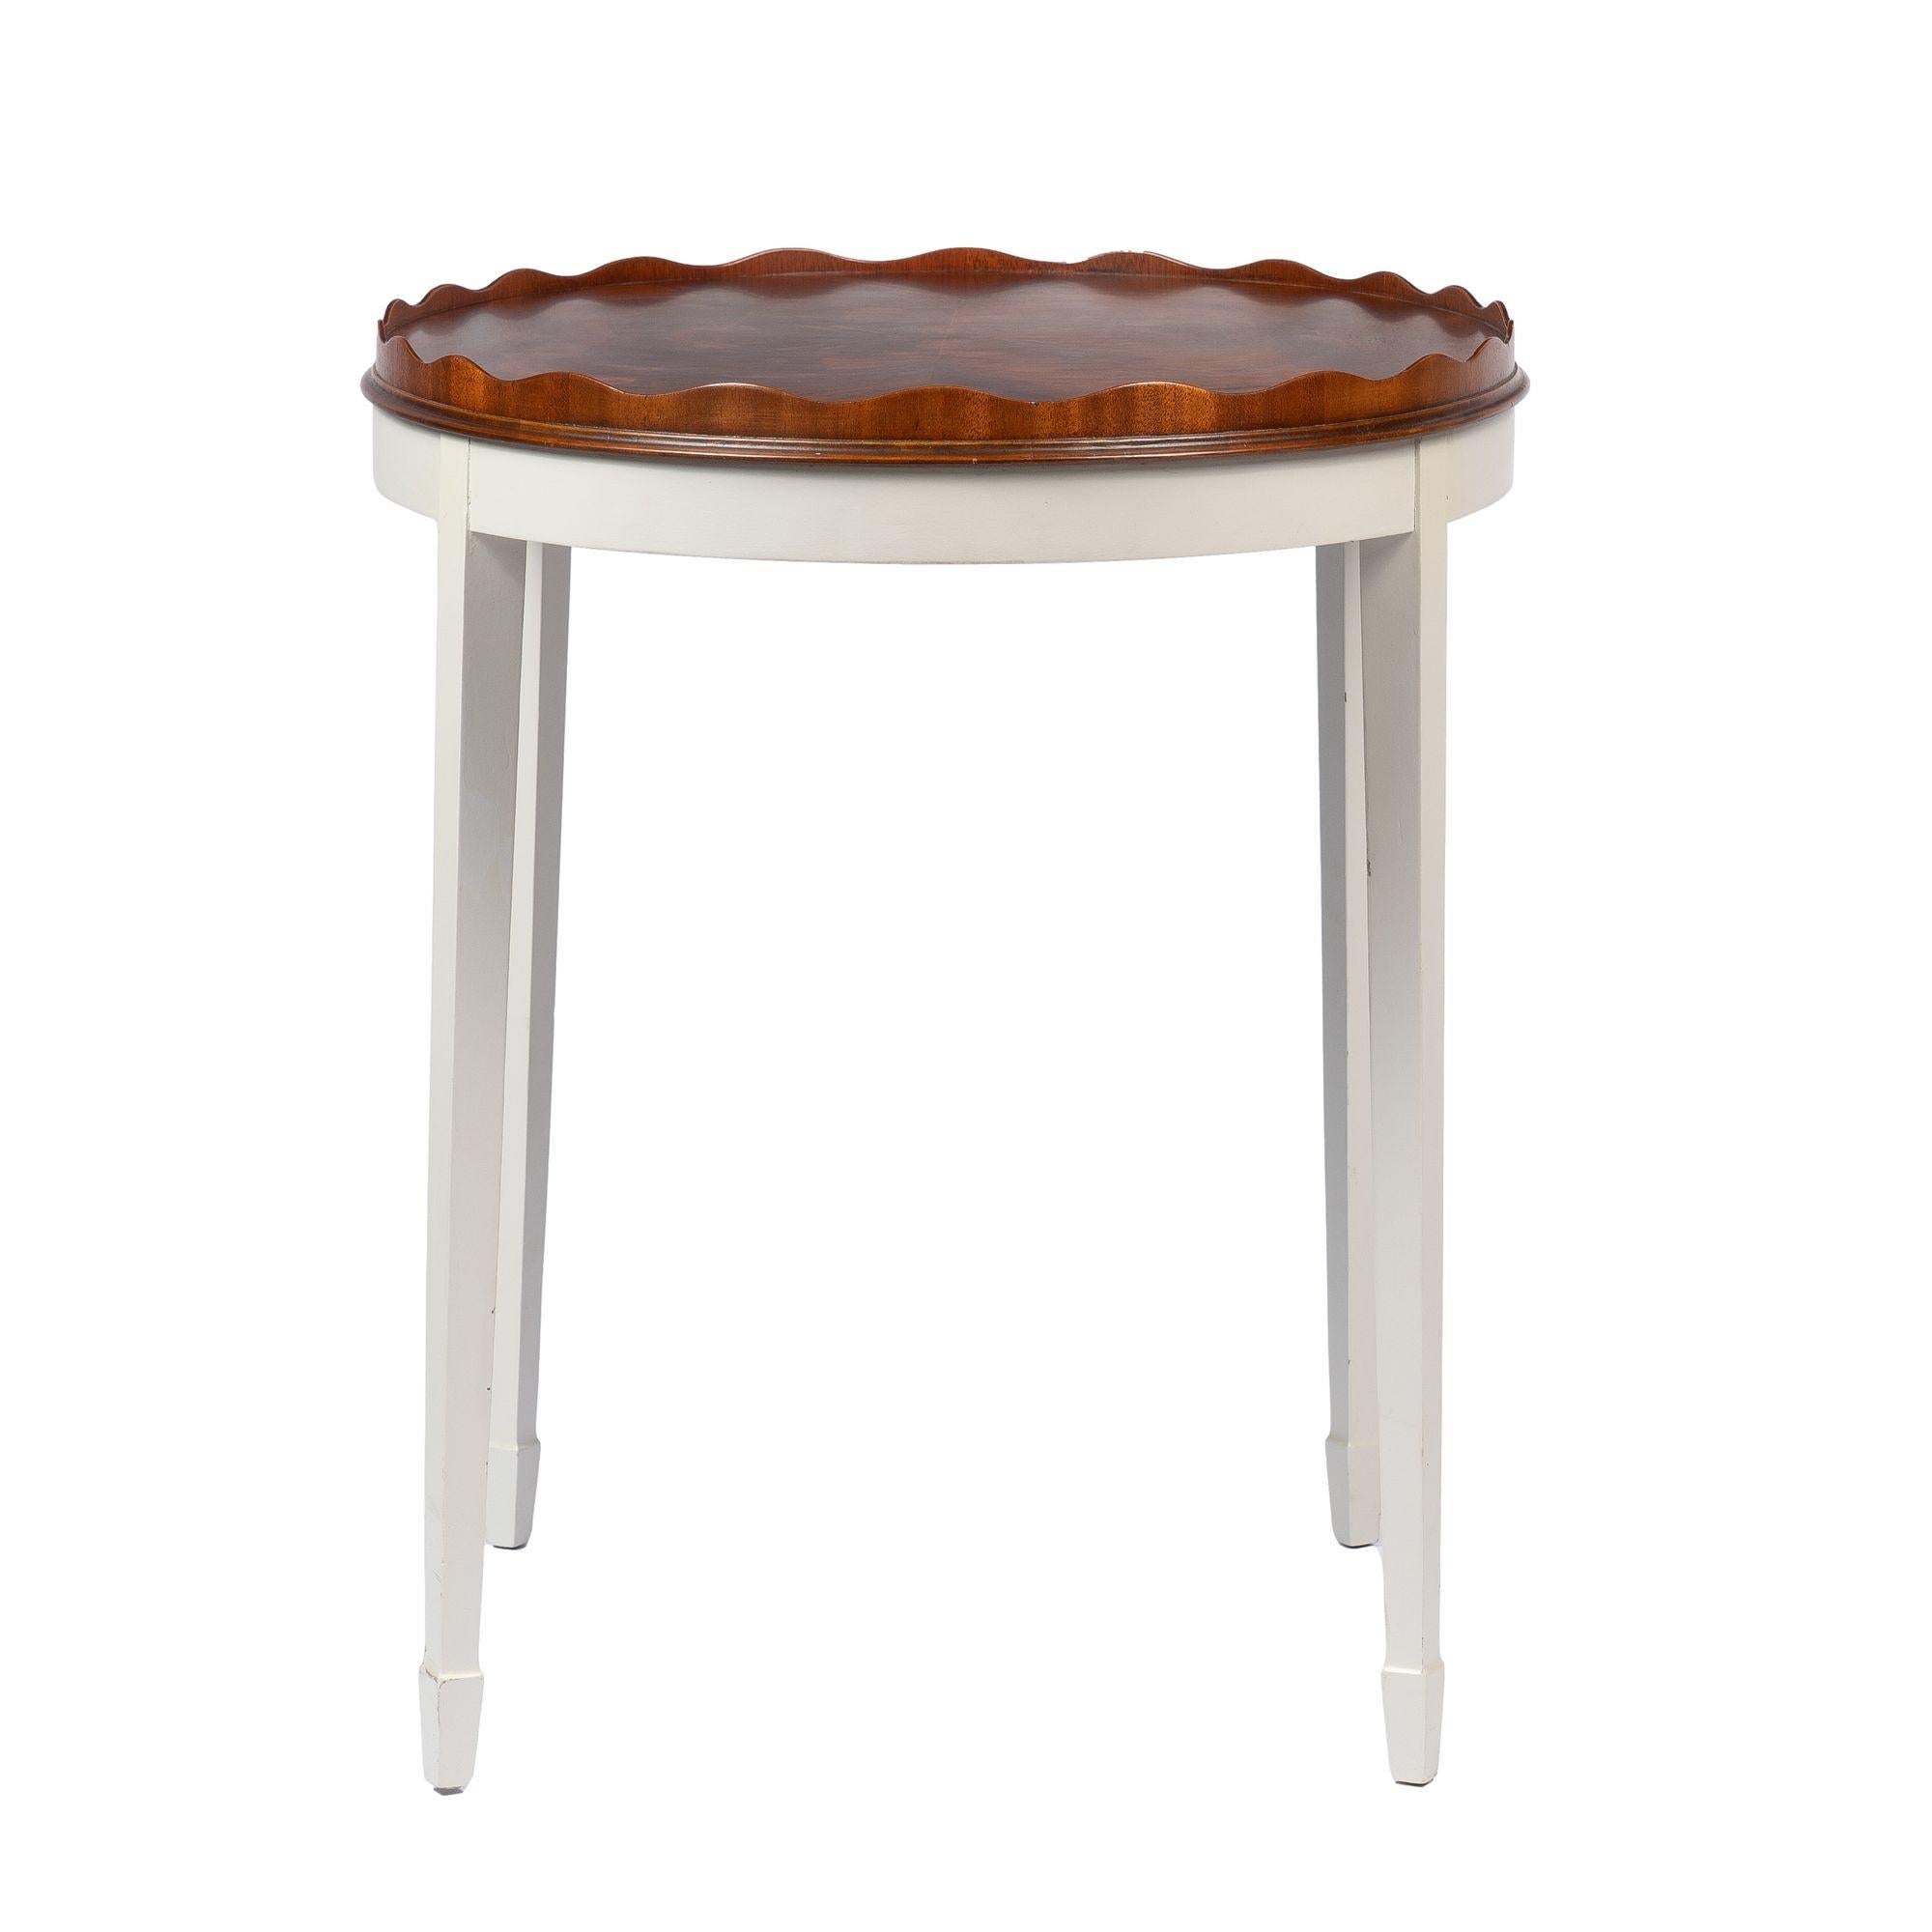 Vintage Figured Mahogany Tray Table on Painted Base For Sale 3